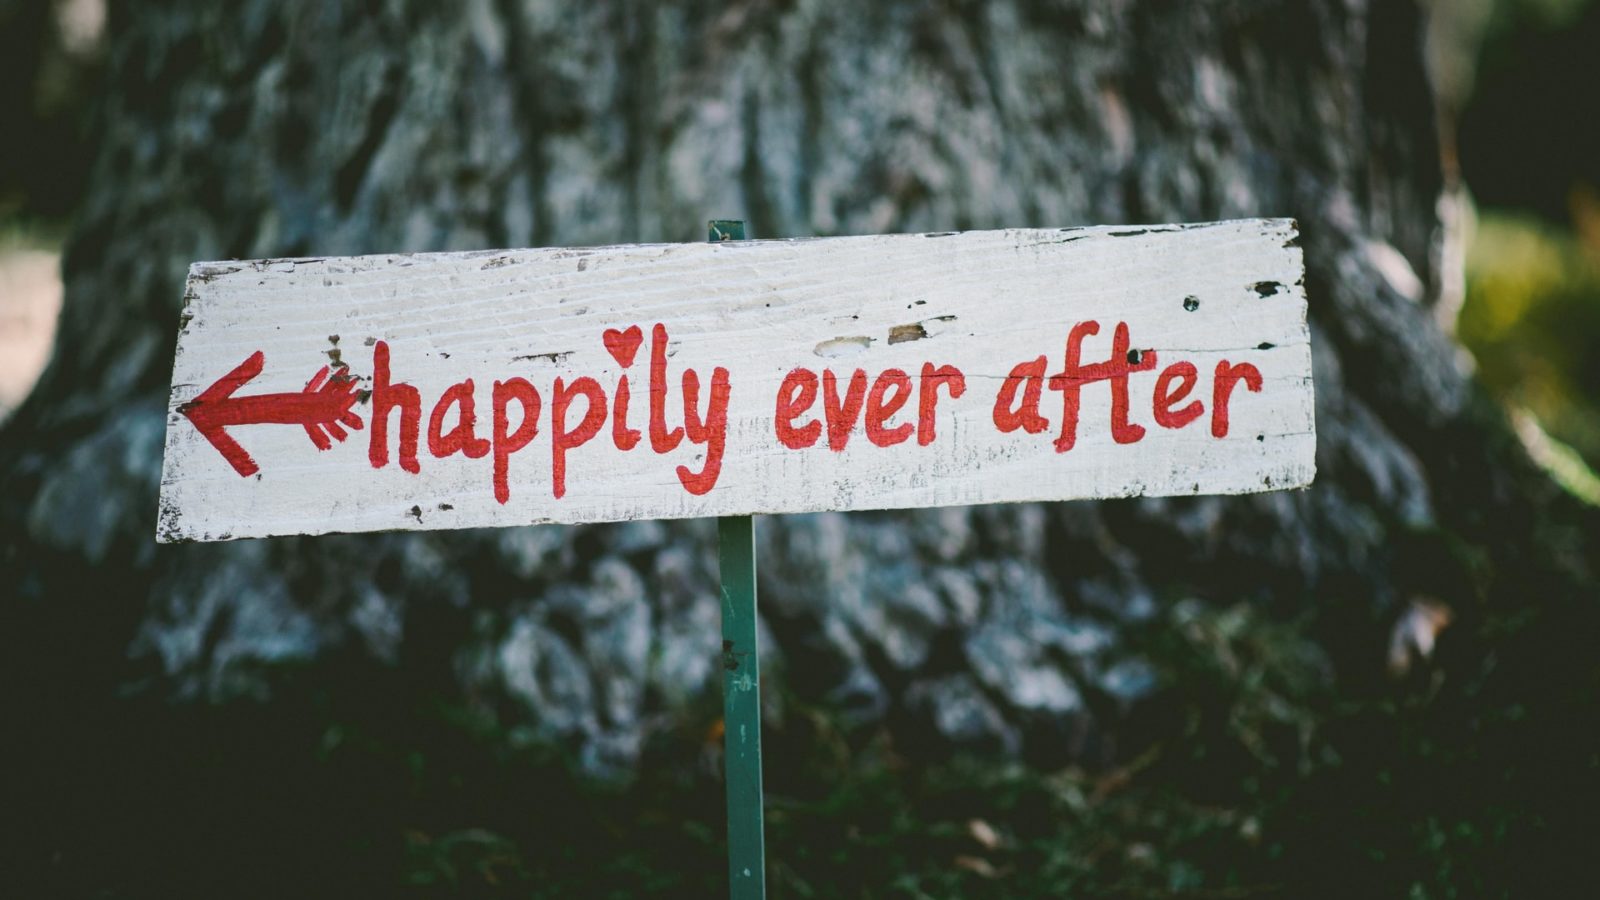 Happily ever after sign, representing the importance of domestic contracts later in life